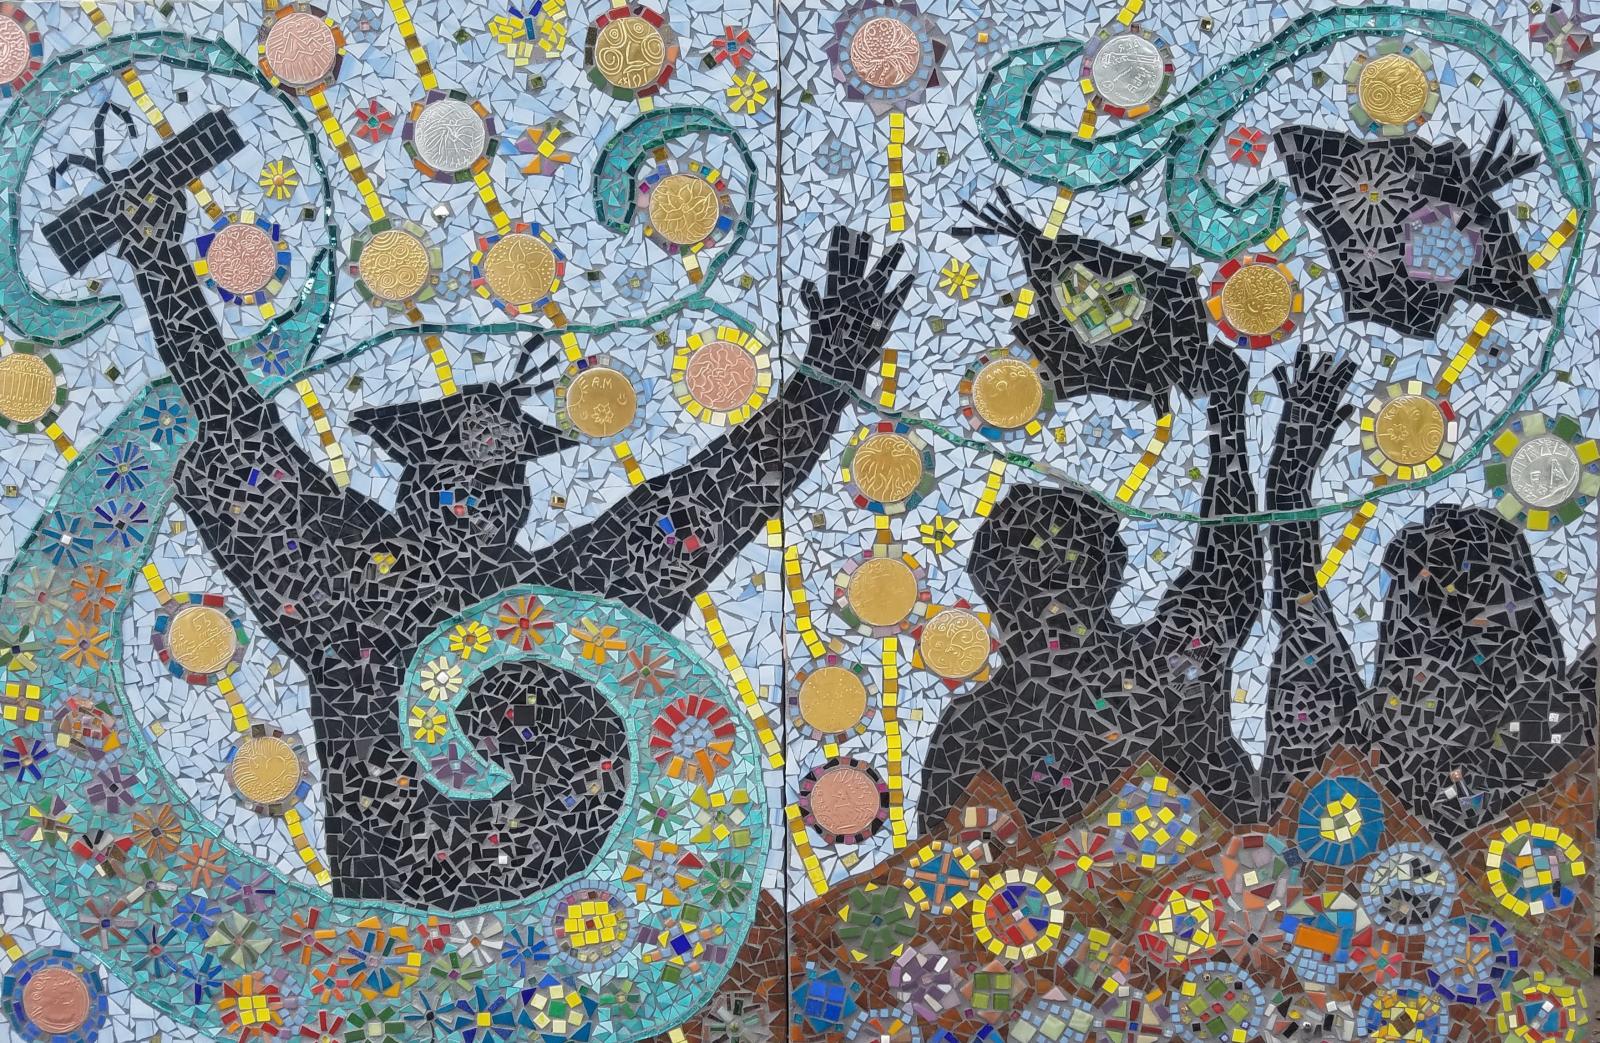  Mosaic Mural created with youth in The Choice Program at  UMBC 
Artivate: Project Youth Artreach: Inc
Location: Excel Academy - Baltimore, MD